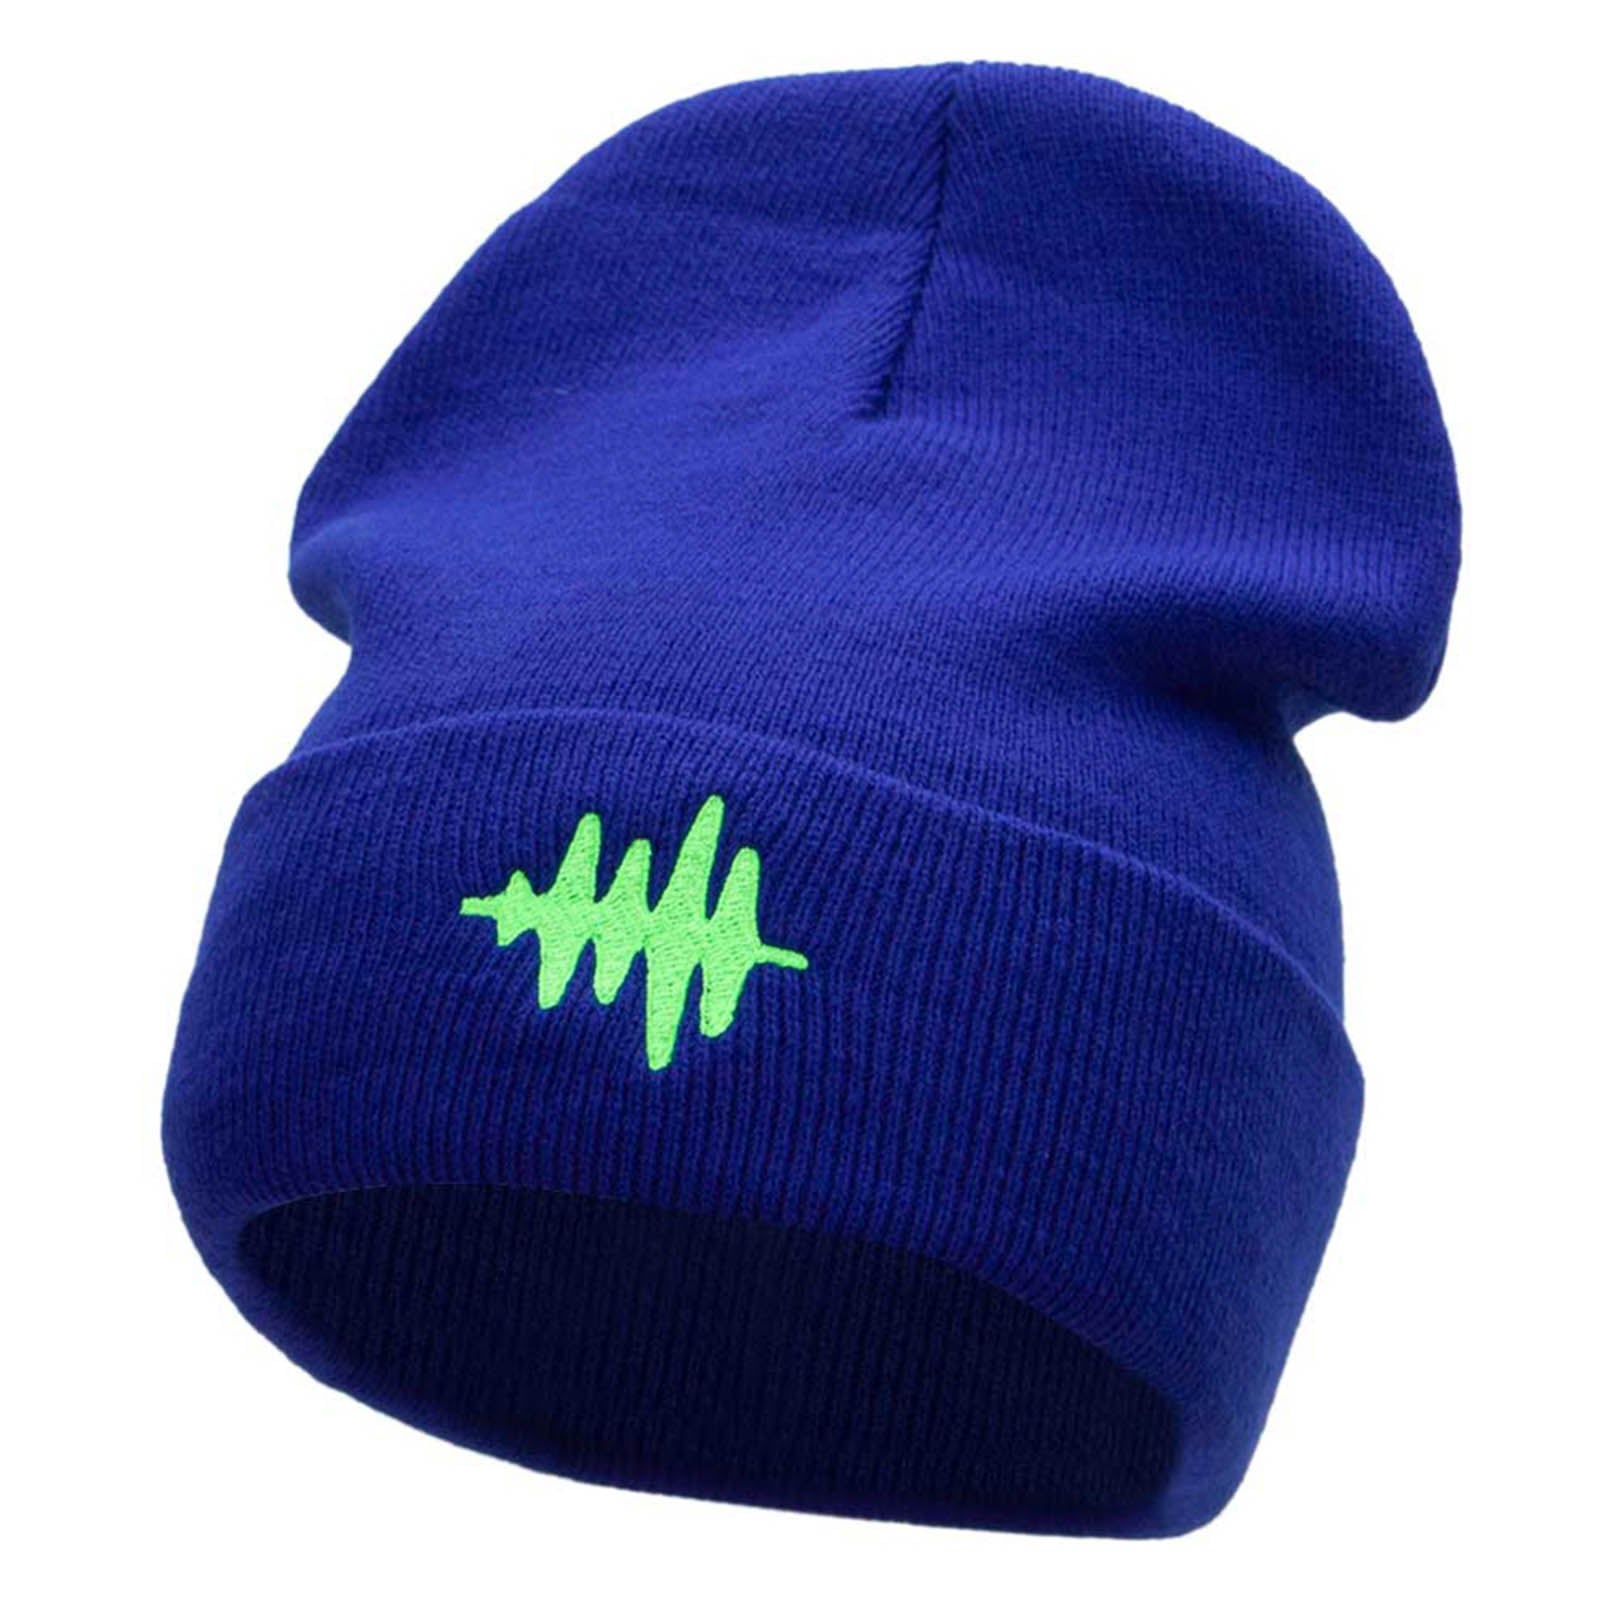 Sound Wave Embroidered 12 Inch Long Knitted Beanie - Royal OSFM